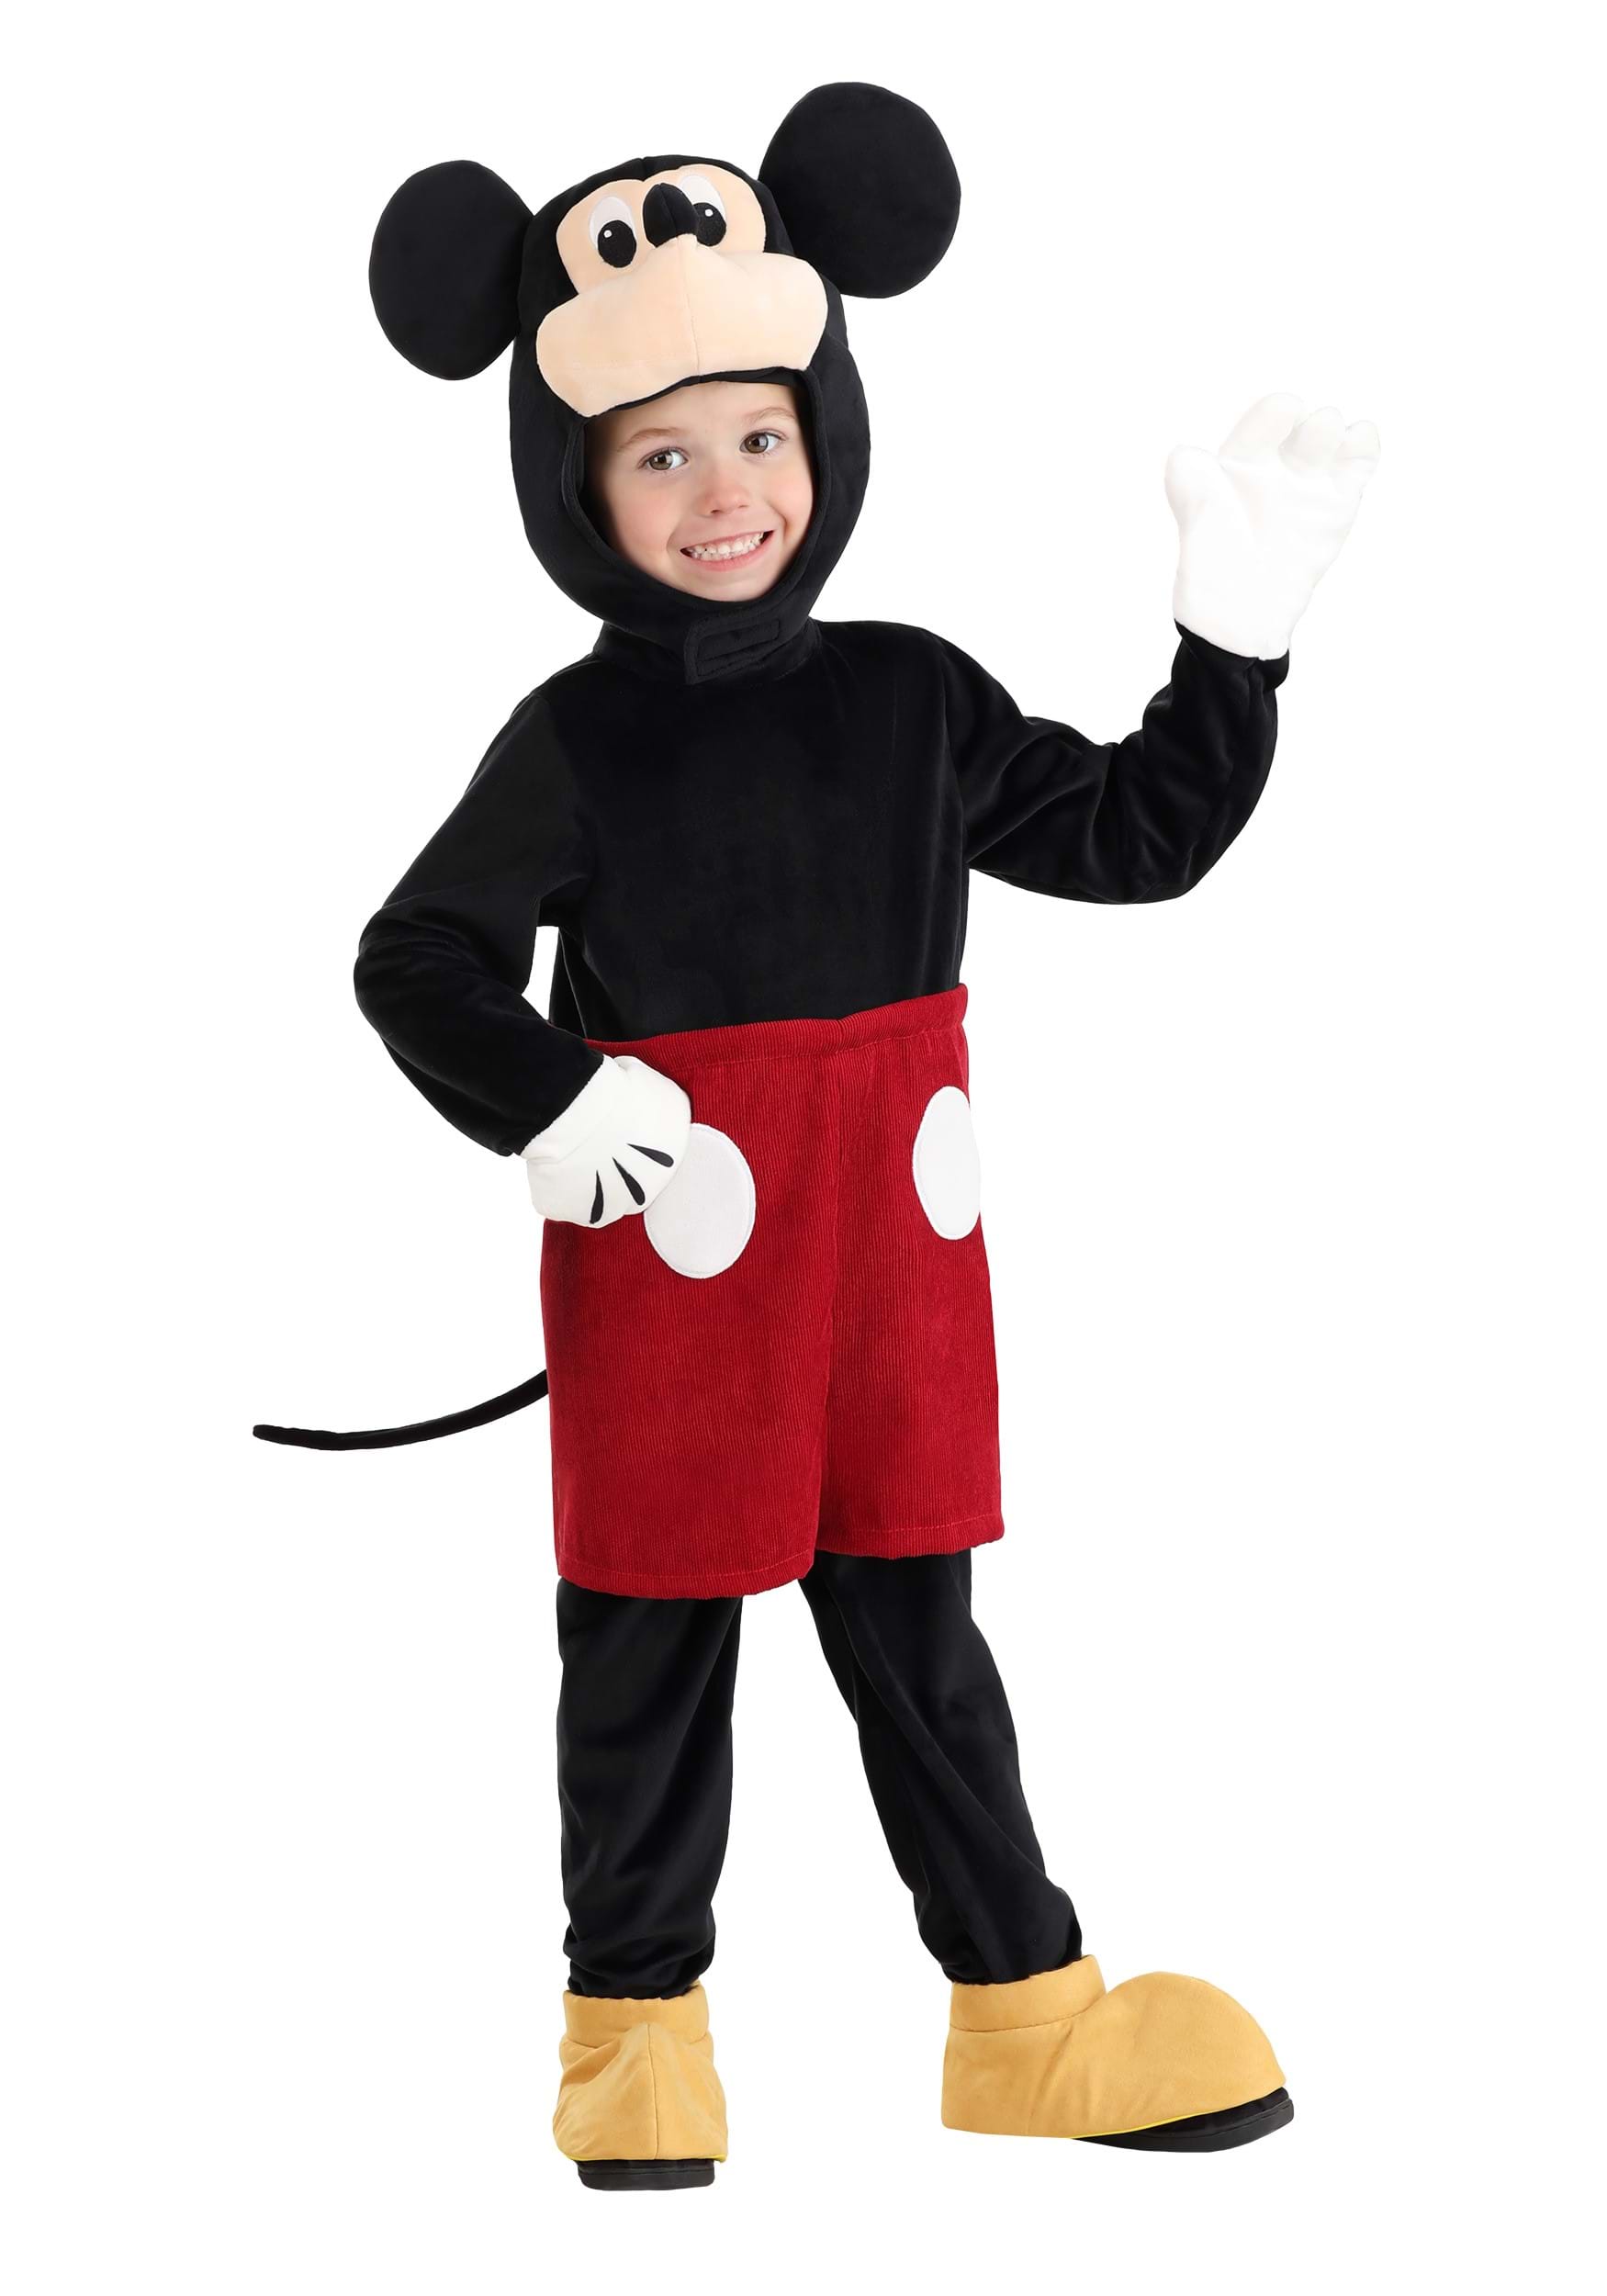 Photos - Fancy Dress FUN Costumes Snuggly Mickey Mouse Toddler Costume Black/Red/Yellow